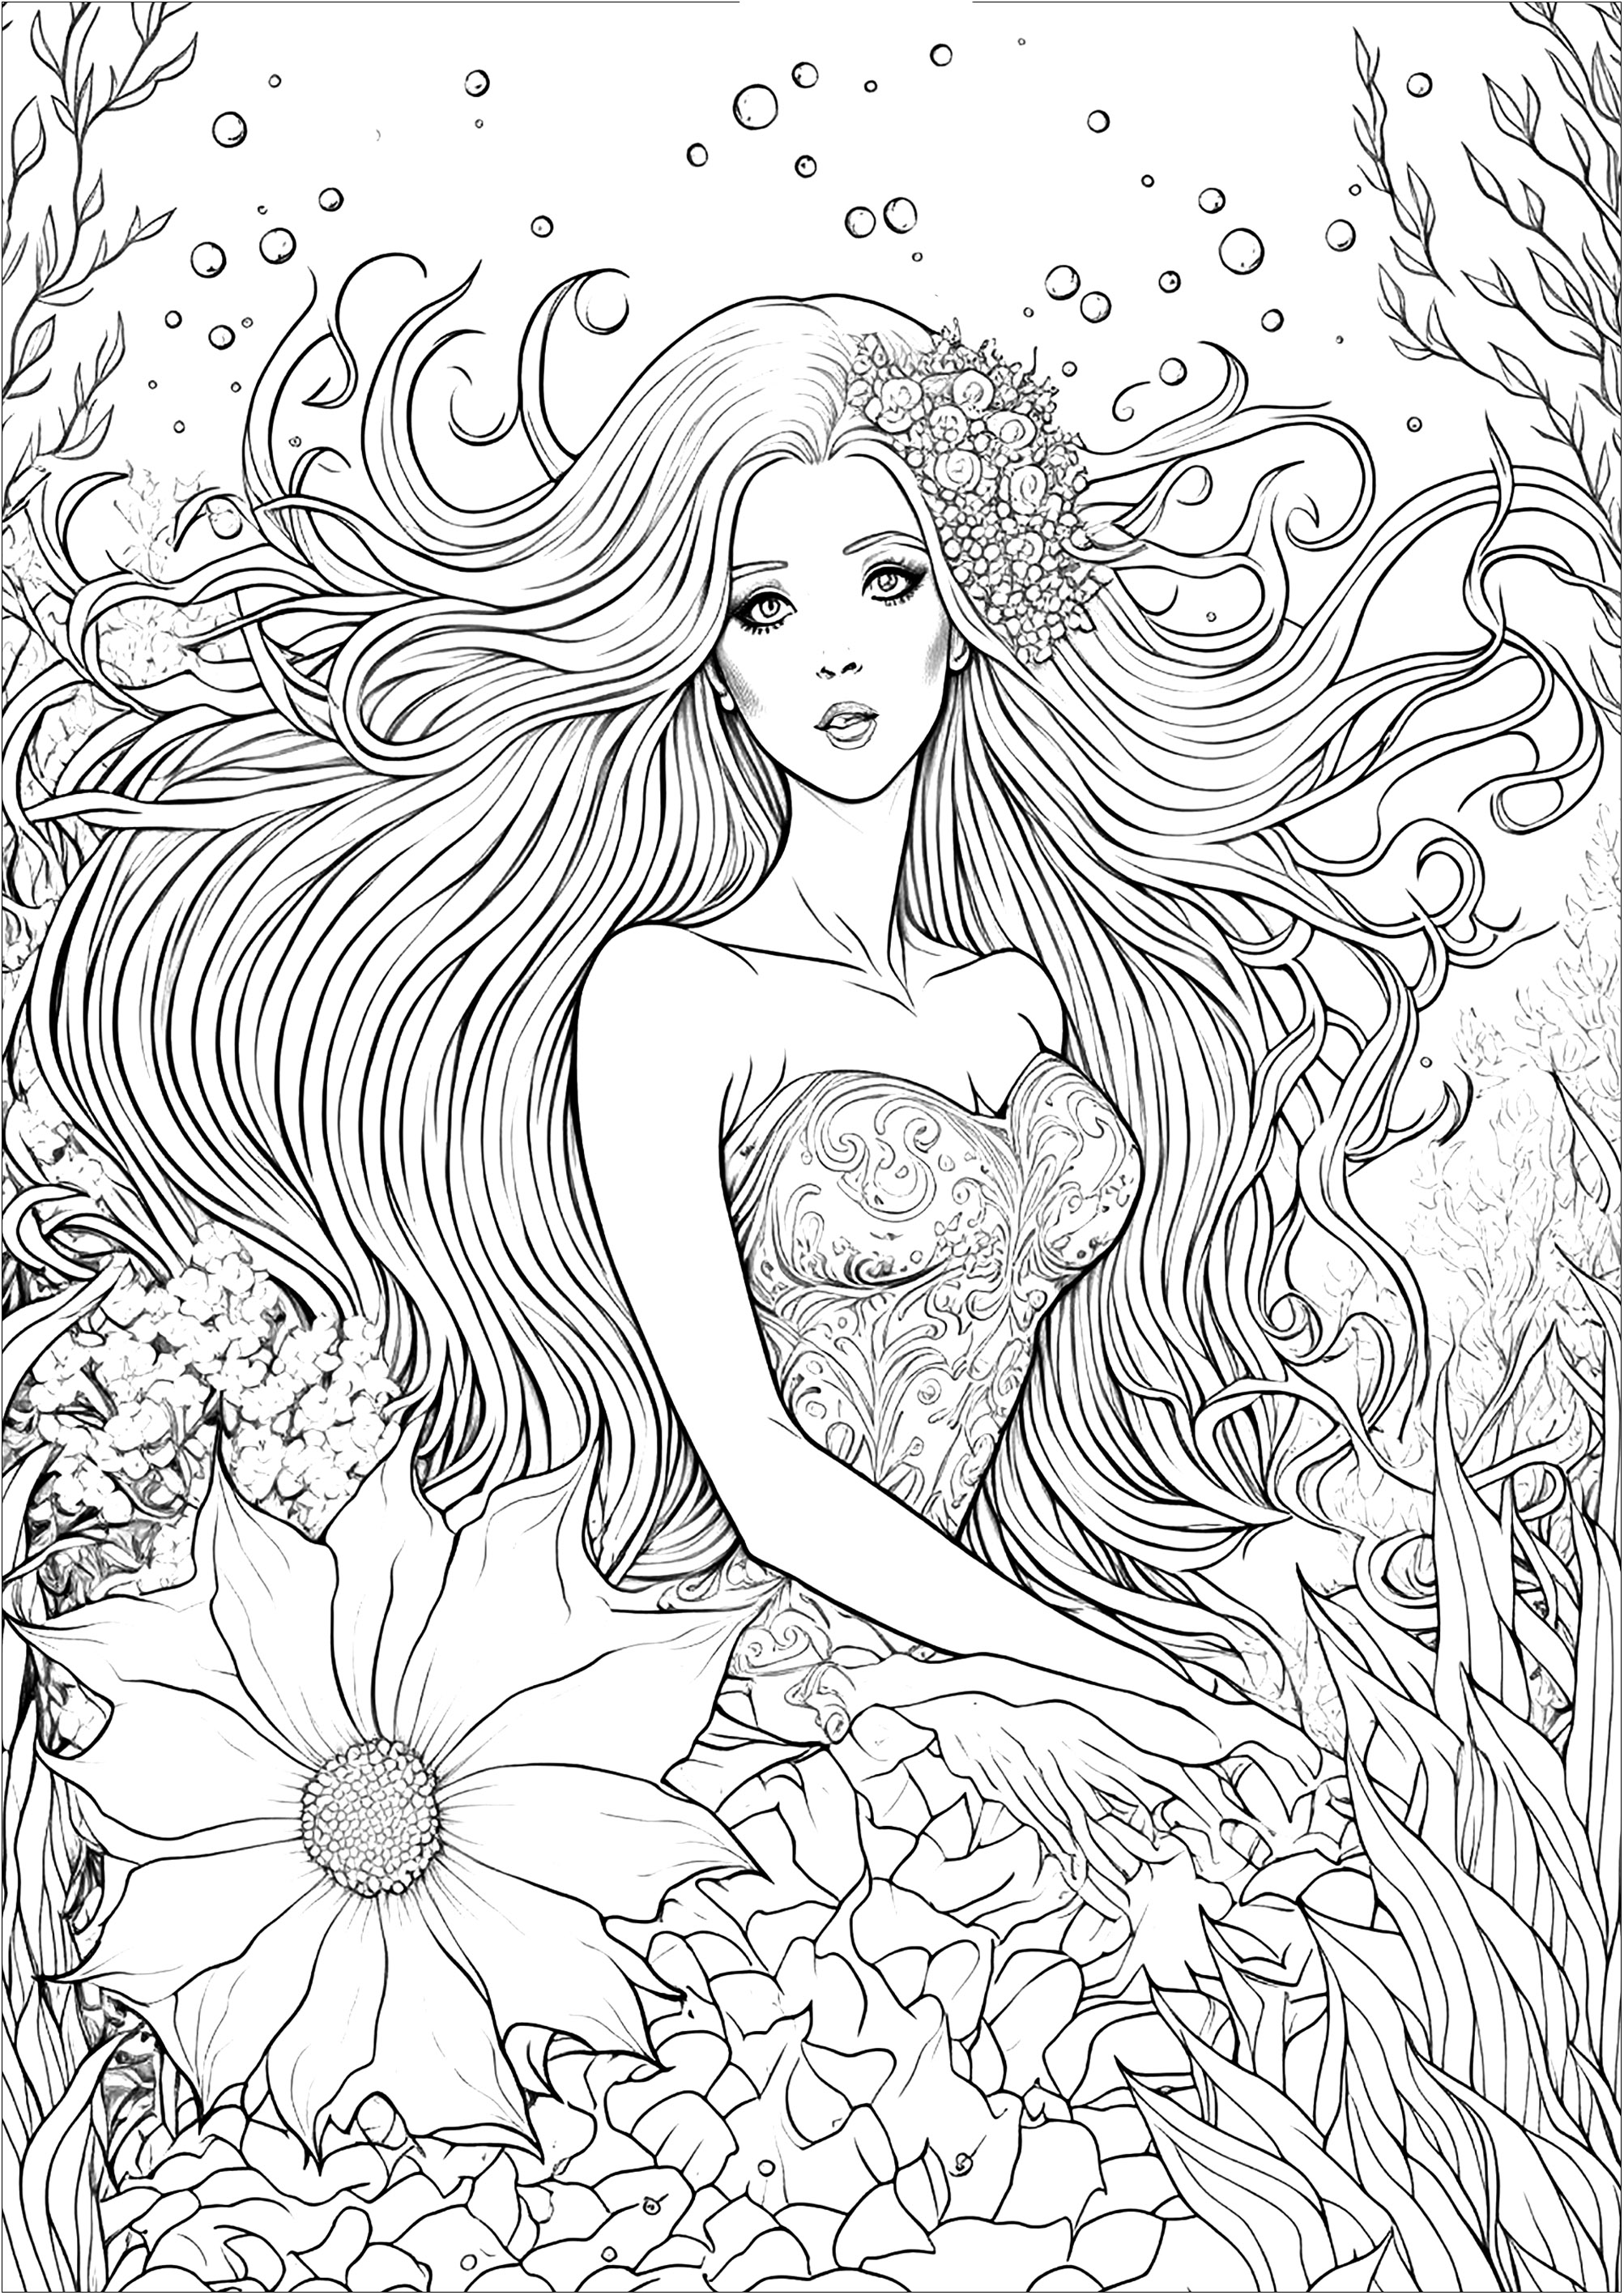 Free art print of Tattoo art, sketch of a mermaid, pisces vintage style |  FreeArt | fa9154263